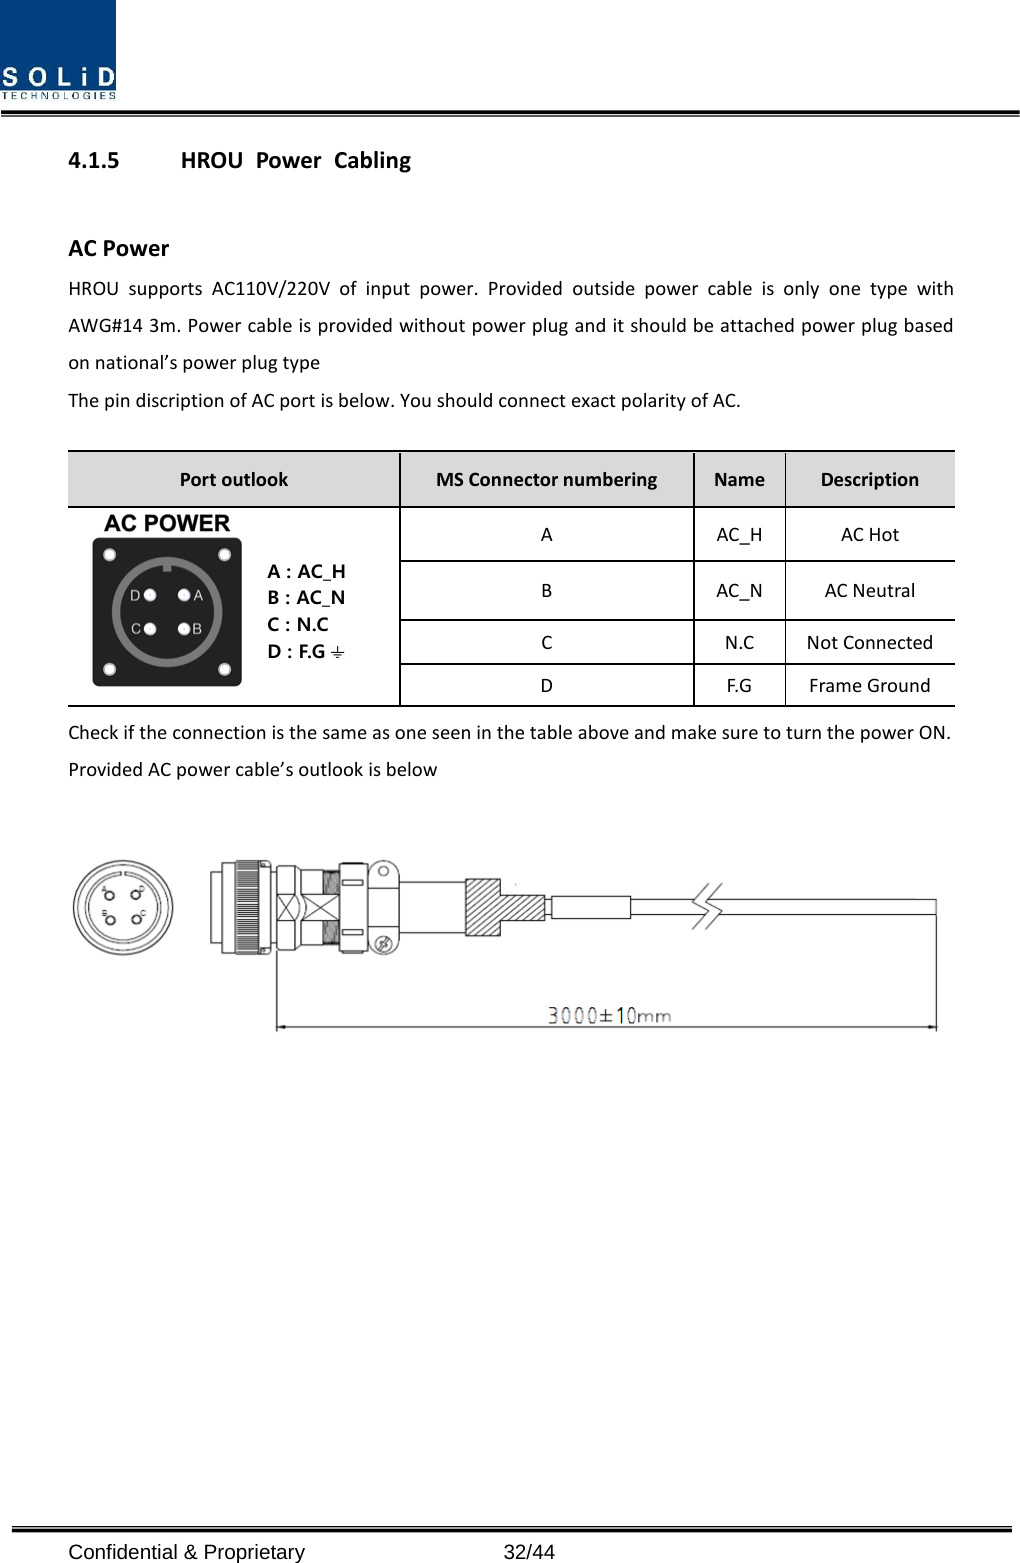  4.1.5 HROU Power Cabling  AC Power HROU supports AC110V/220V of input power. Provided outside power cable is only one type with AWG#14 3m. Power cable is provided without power plug and it should be attached power plug based on national’s power plug type The pin discription of AC port is below. You should connect exact polarity of AC.  Port outlook MS Connector numbering  Name  Description A : AC_HB : AC_NC : N.CD : F.G A  AC_H AC Hot B  AC_N AC Neutral C  N.C Not Connected D  F.G Frame Ground Check if the connection is the same as one seen in the table above and make sure to turn the power ON. Provided AC power cable’s outlook is below              Confidential &amp; Proprietary                   32/44 